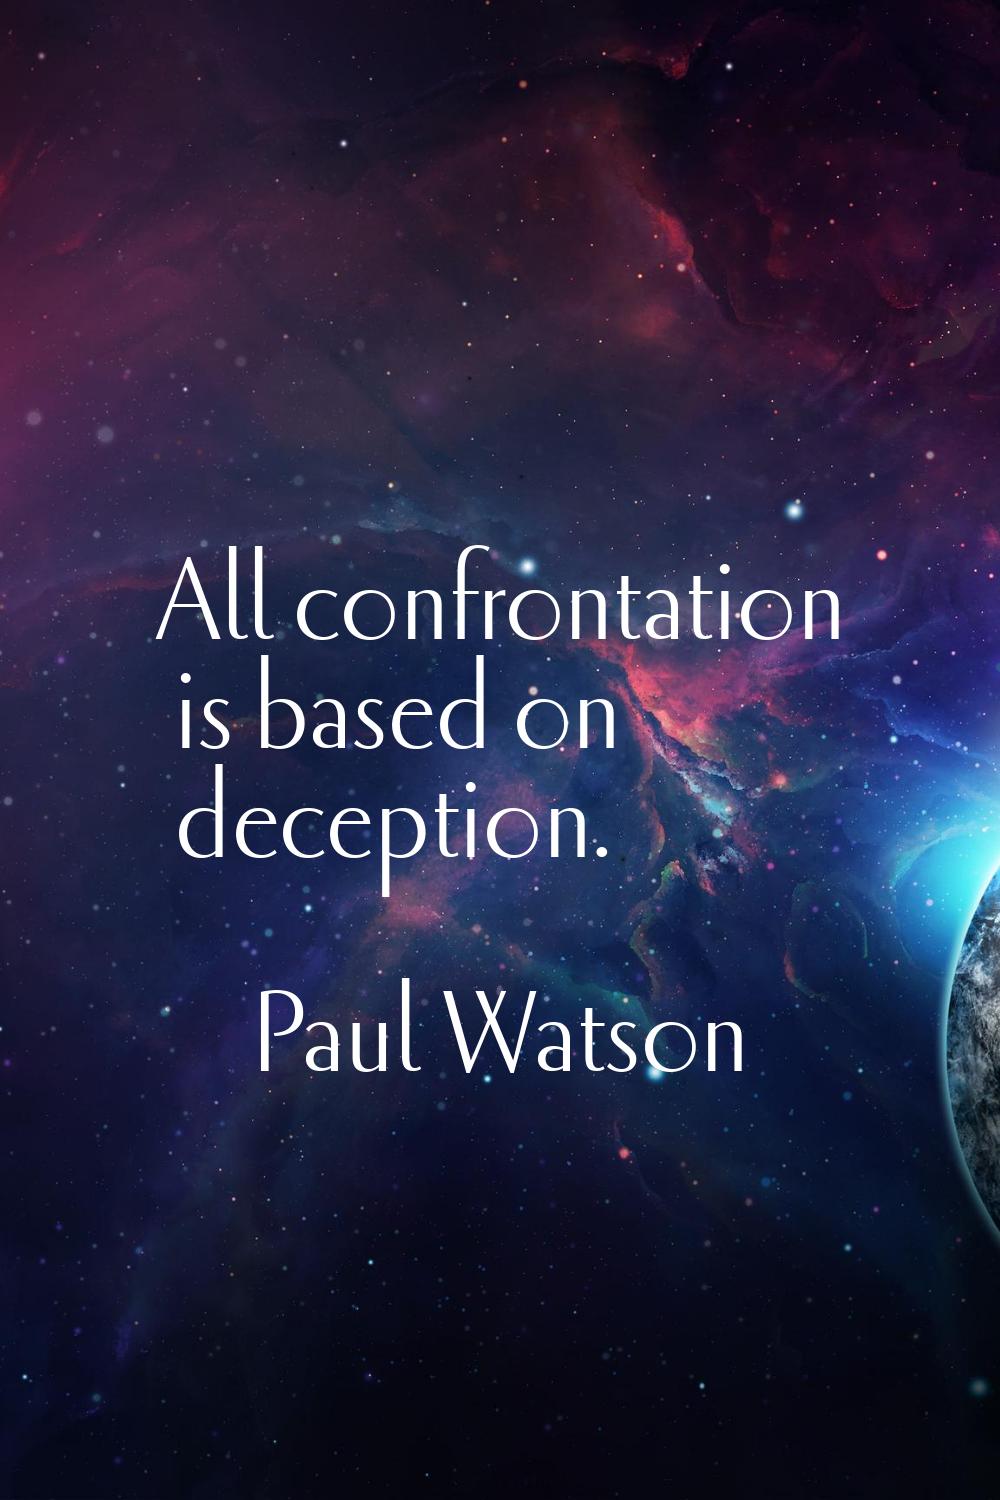 All confrontation is based on deception.